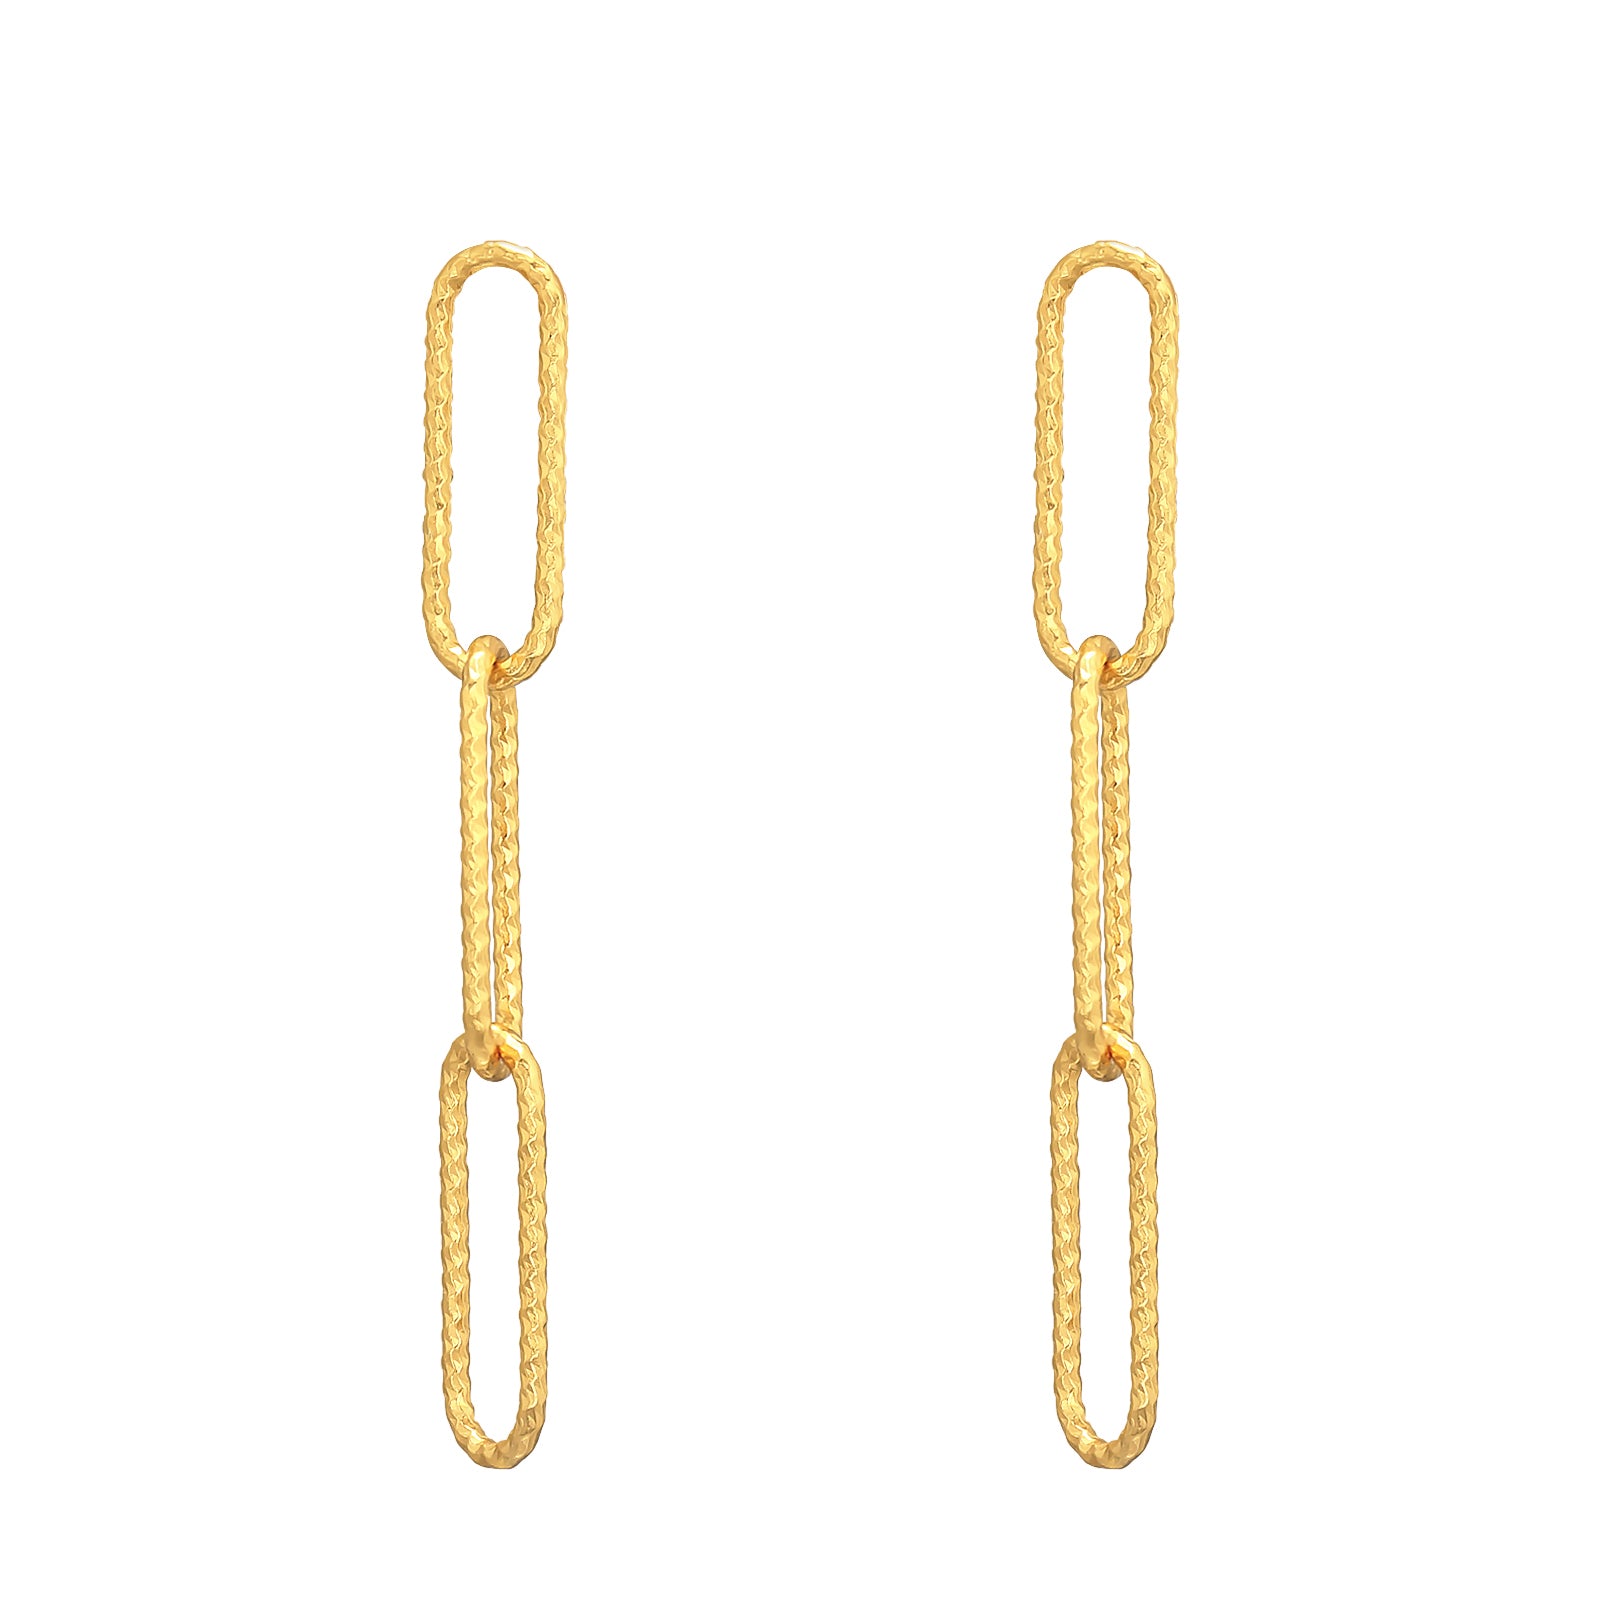 Chain 925 Silver Earrings, gold plated